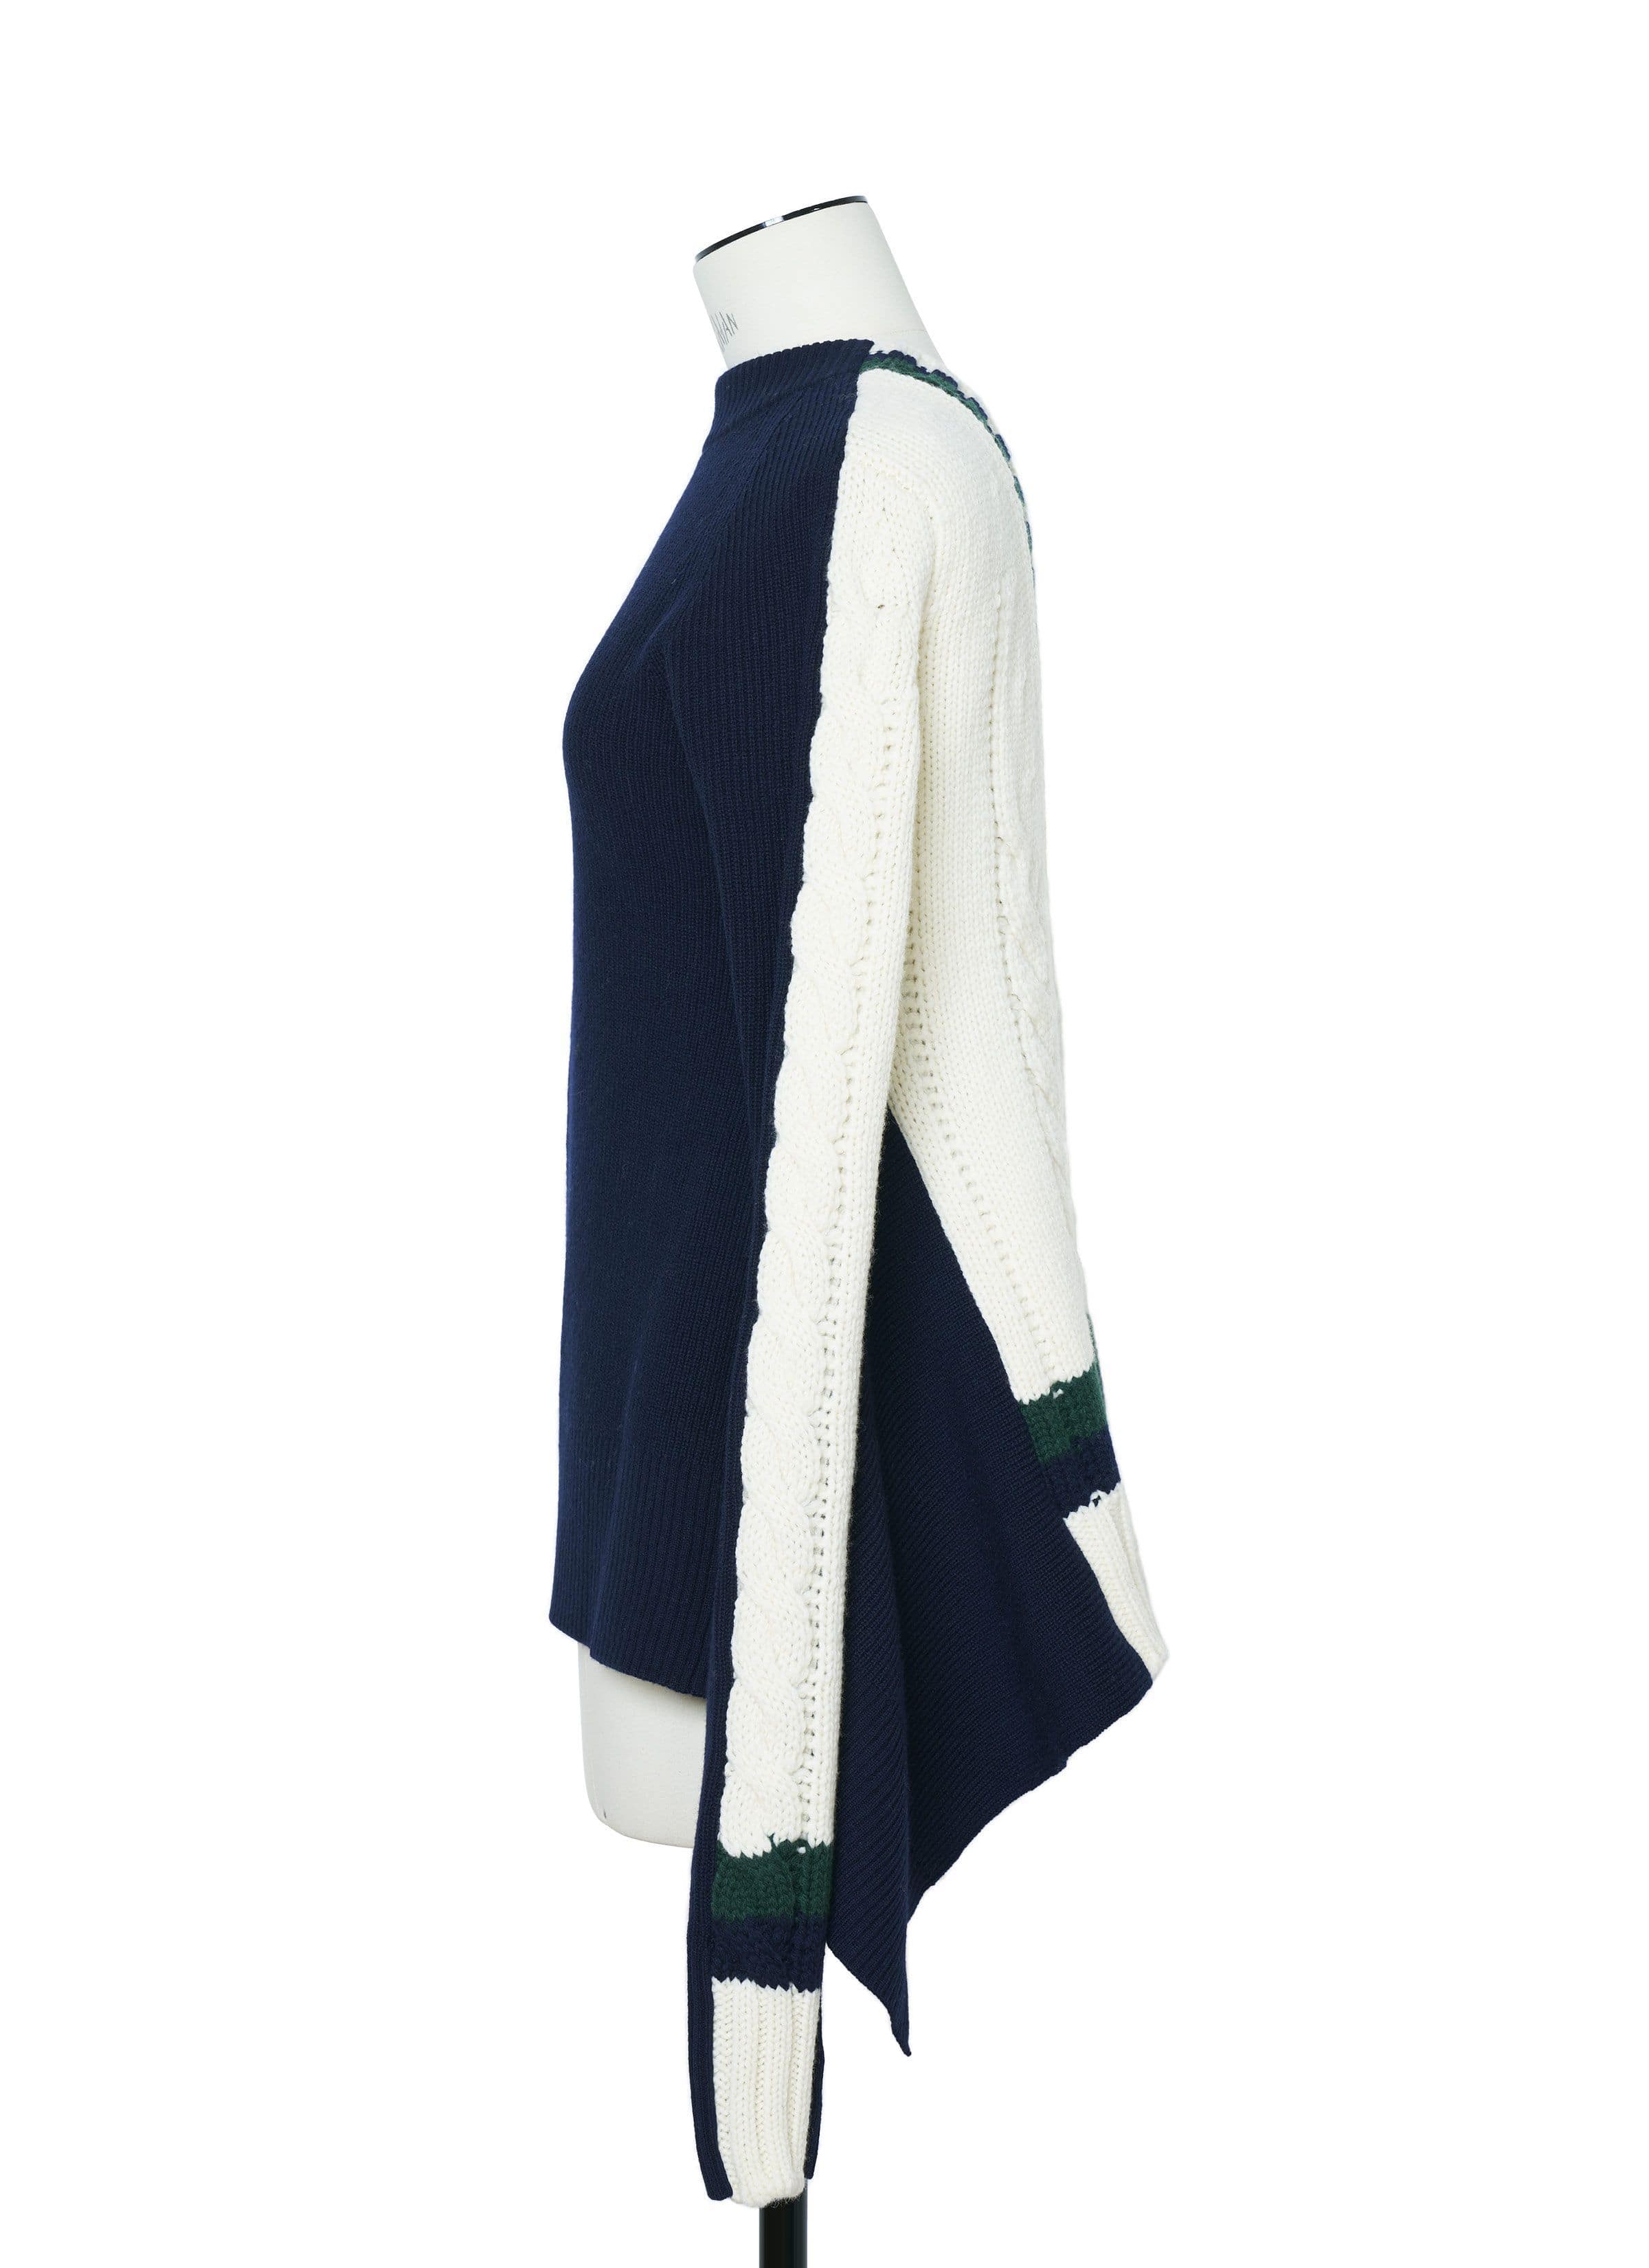 Wool Knit Pullover 詳細画像 NAVY×OFF WHITE 2